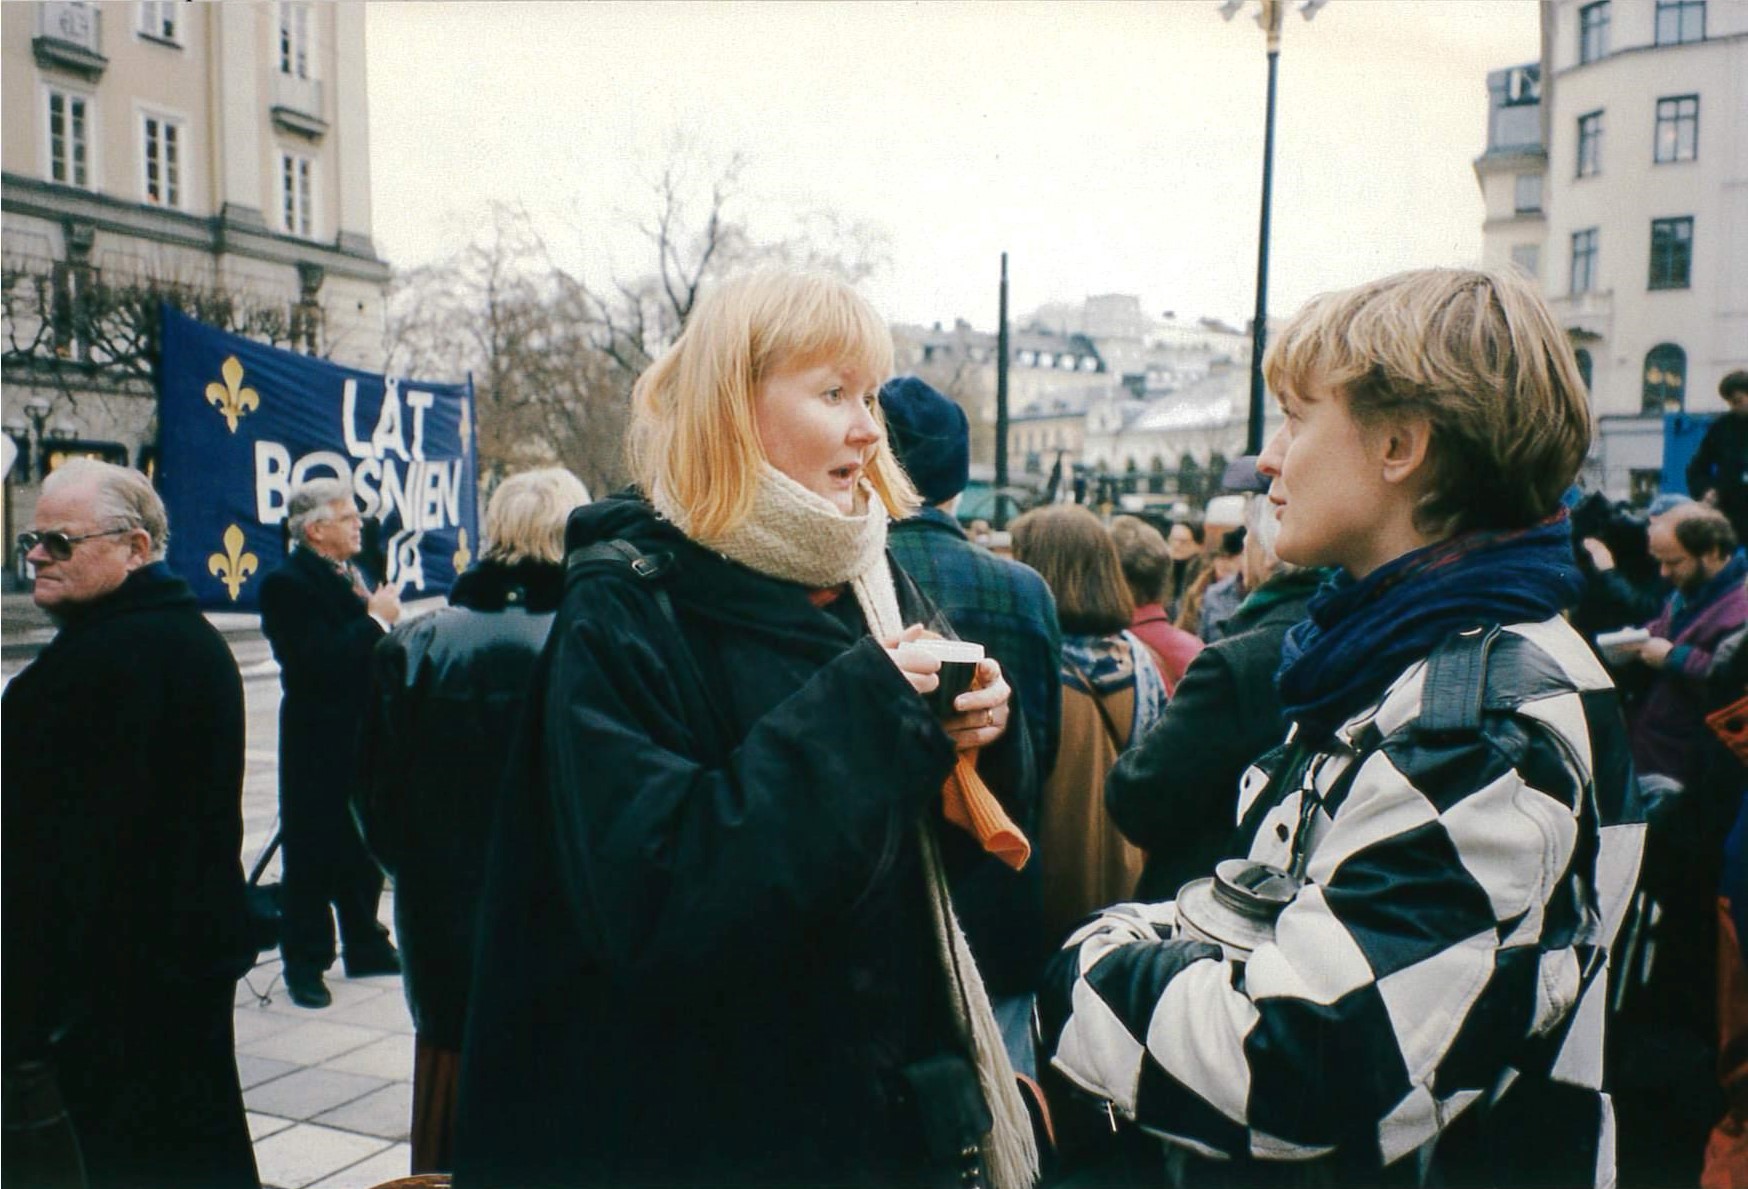 Eva Zillén at one of the gatherings on Norrmalm square in Stockholm, 1993.